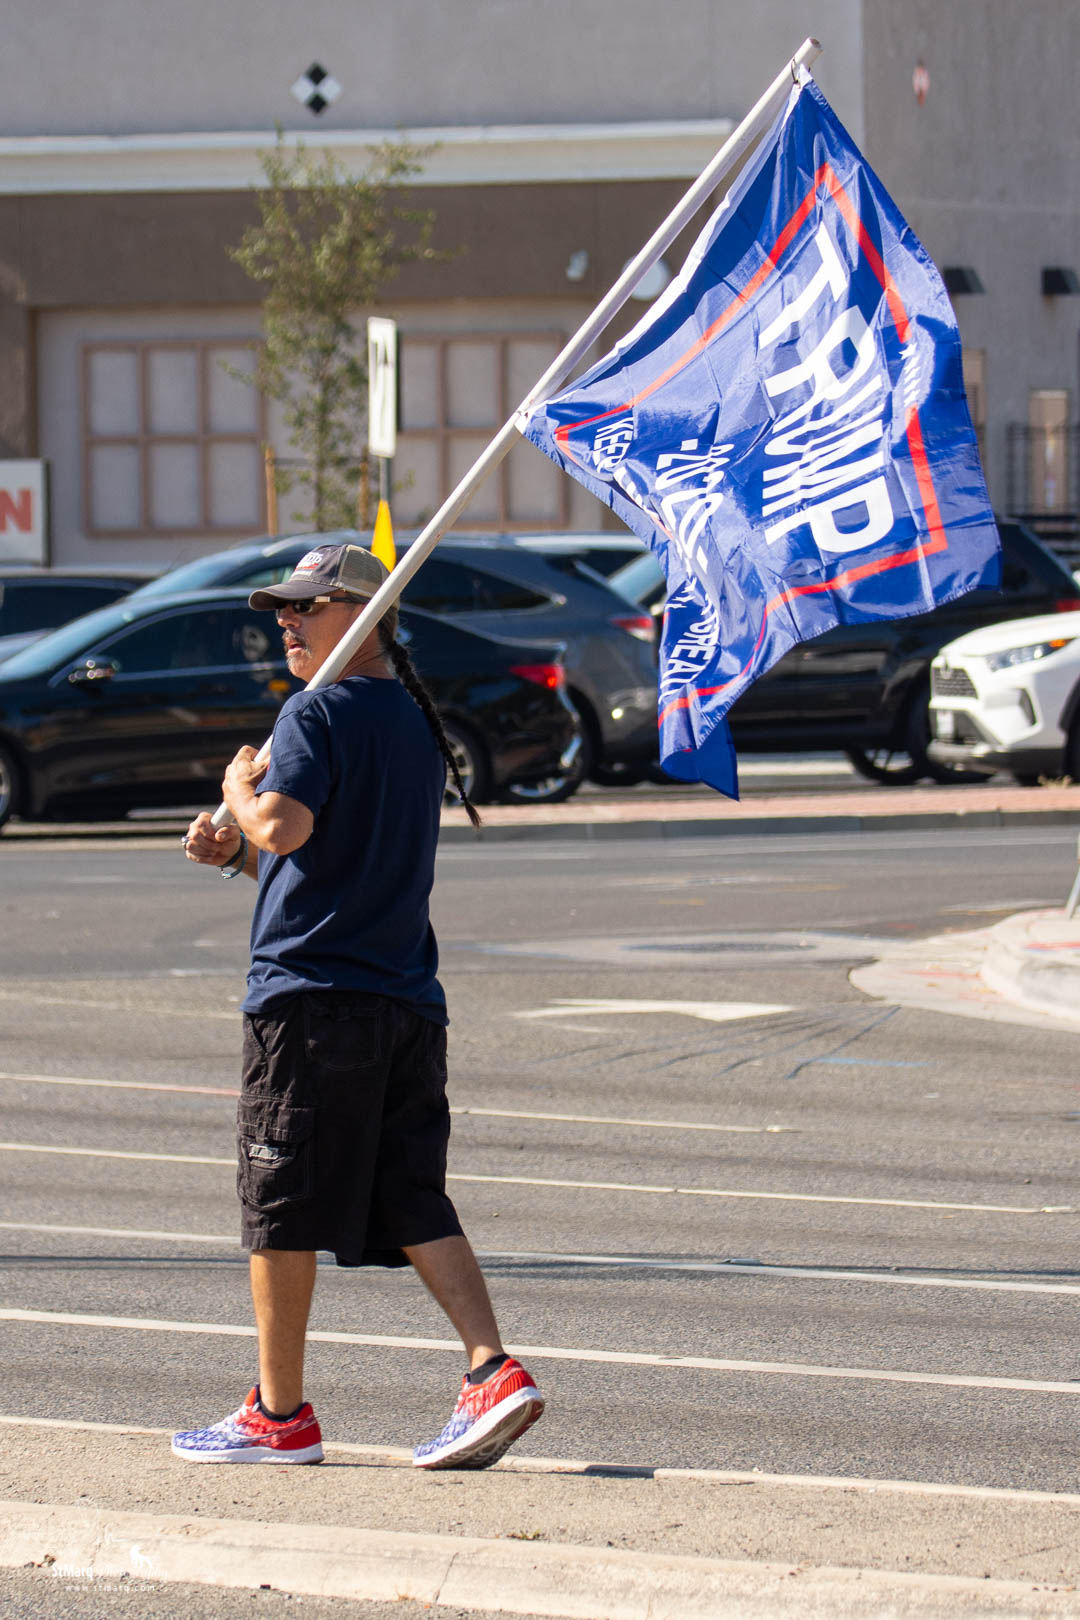 Fernando Castillo walks in the center divider of Imperial Highway with a Trump flag on Sunday, October 18, 2020 at a Rally in support of president Trump in La Habra, California.